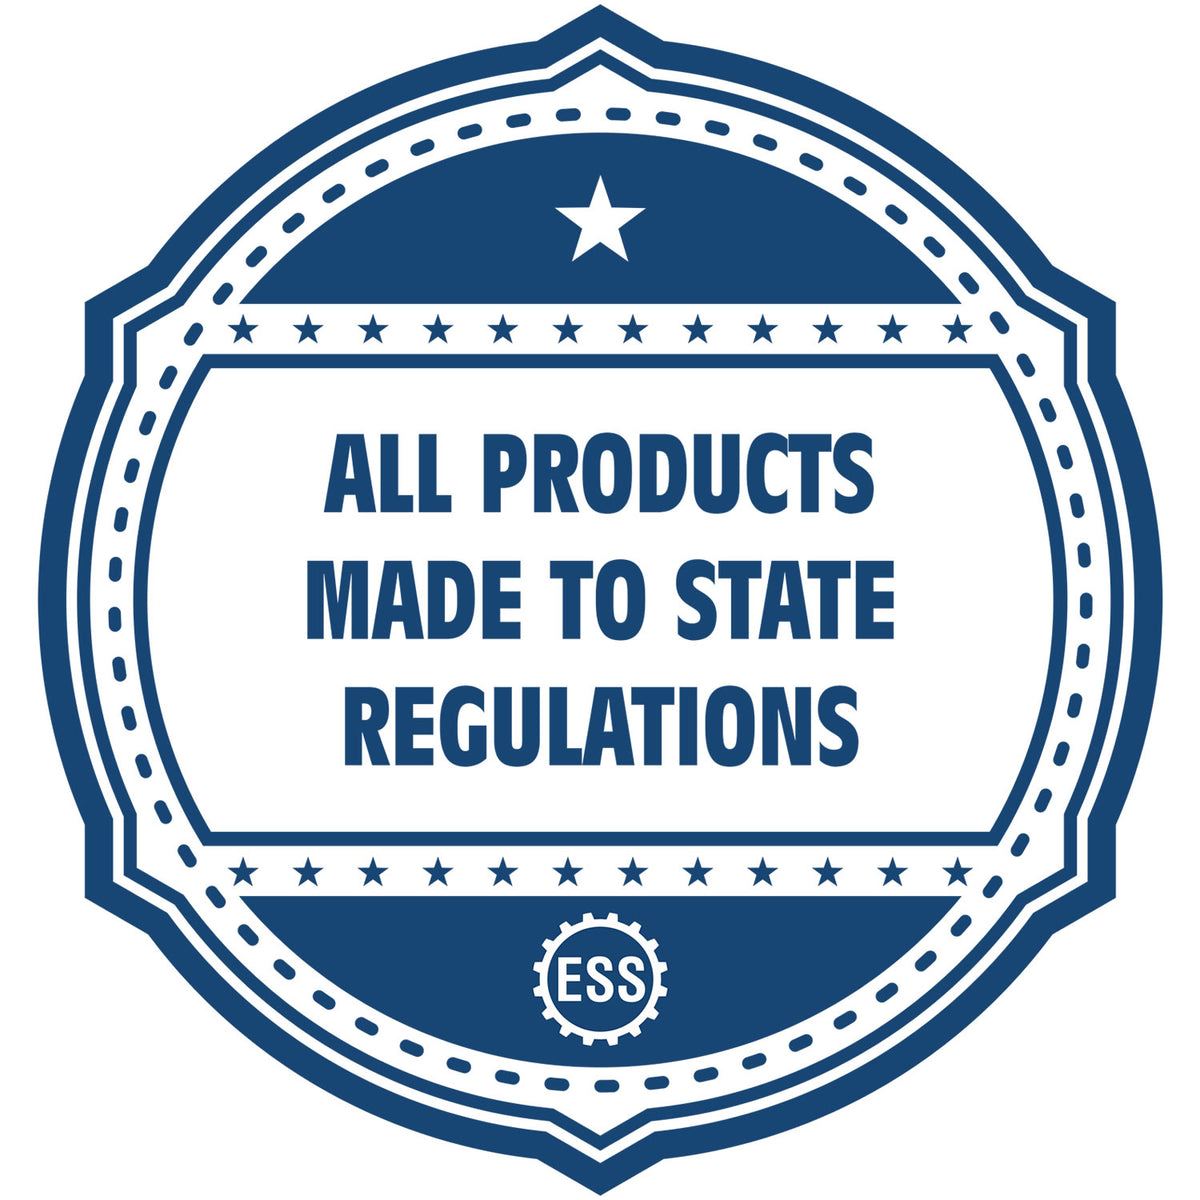 An icon or badge element for the MaxLight Premium Pre-Inked Maine State Seal Notarial Stamp showing that this product is made in compliance with state regulations.